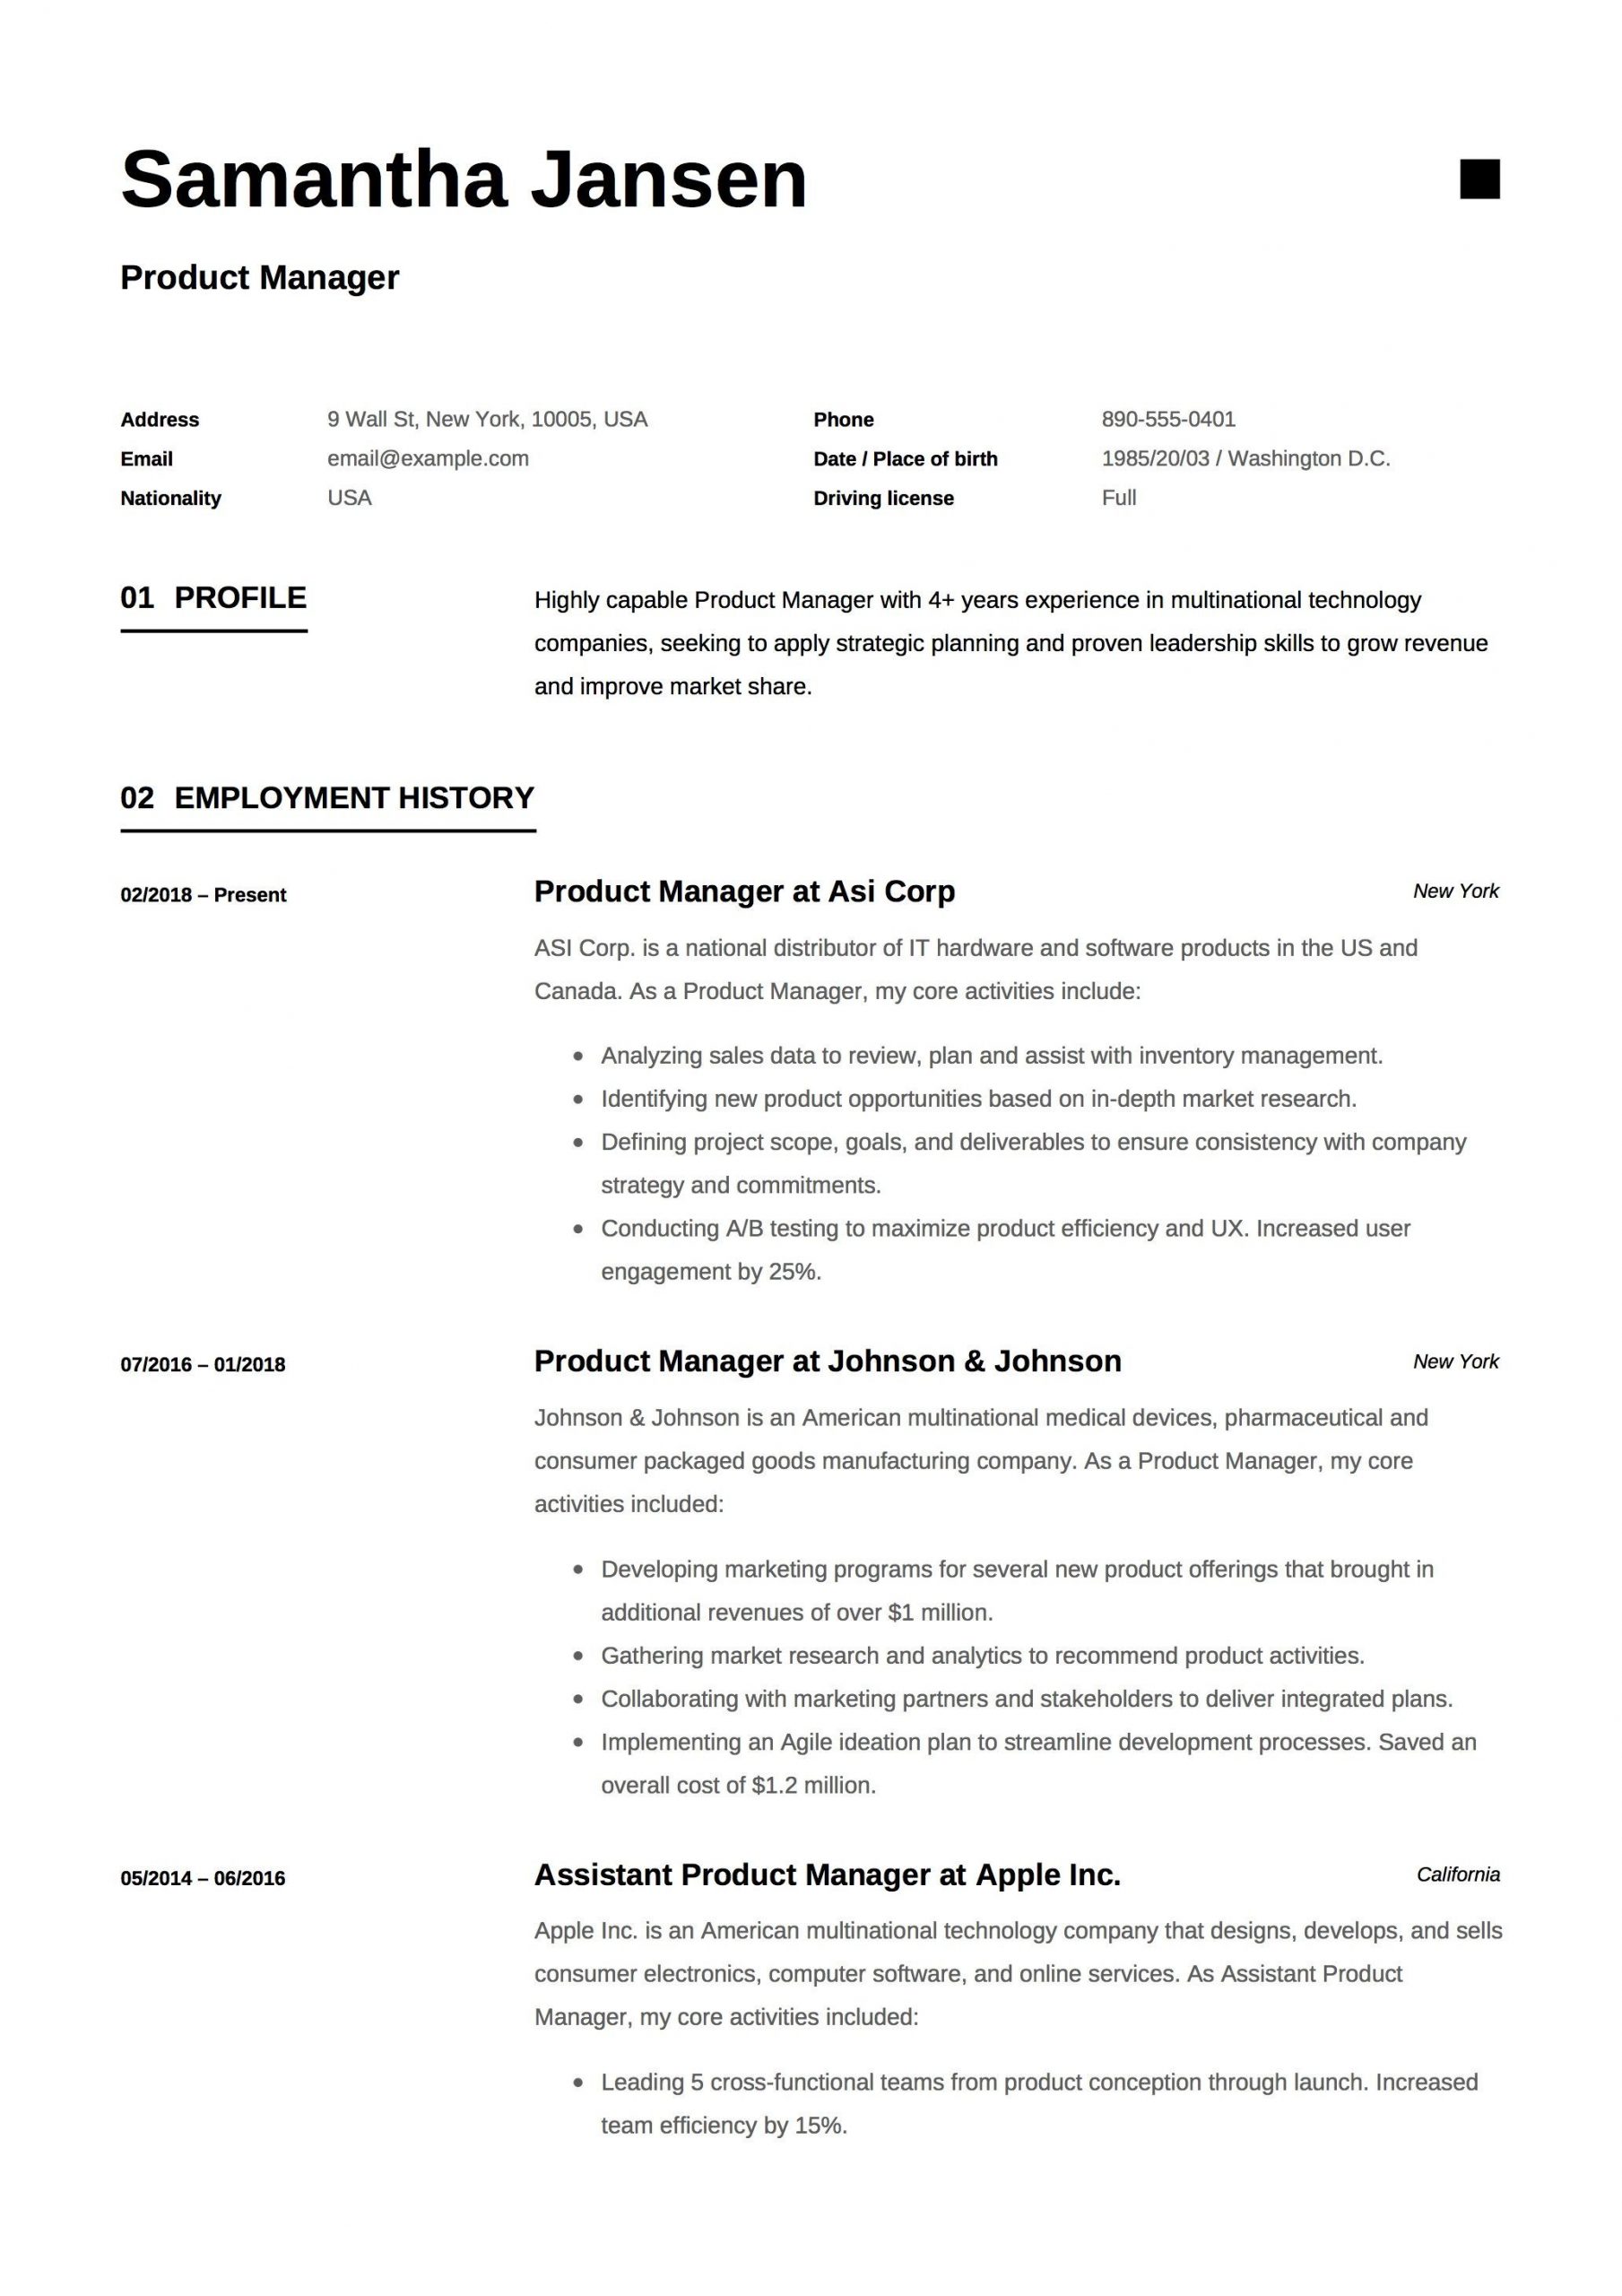 Sample Resume for Print Production Manager Product Manager Resume Sample, Template, Example, Cv, formal …